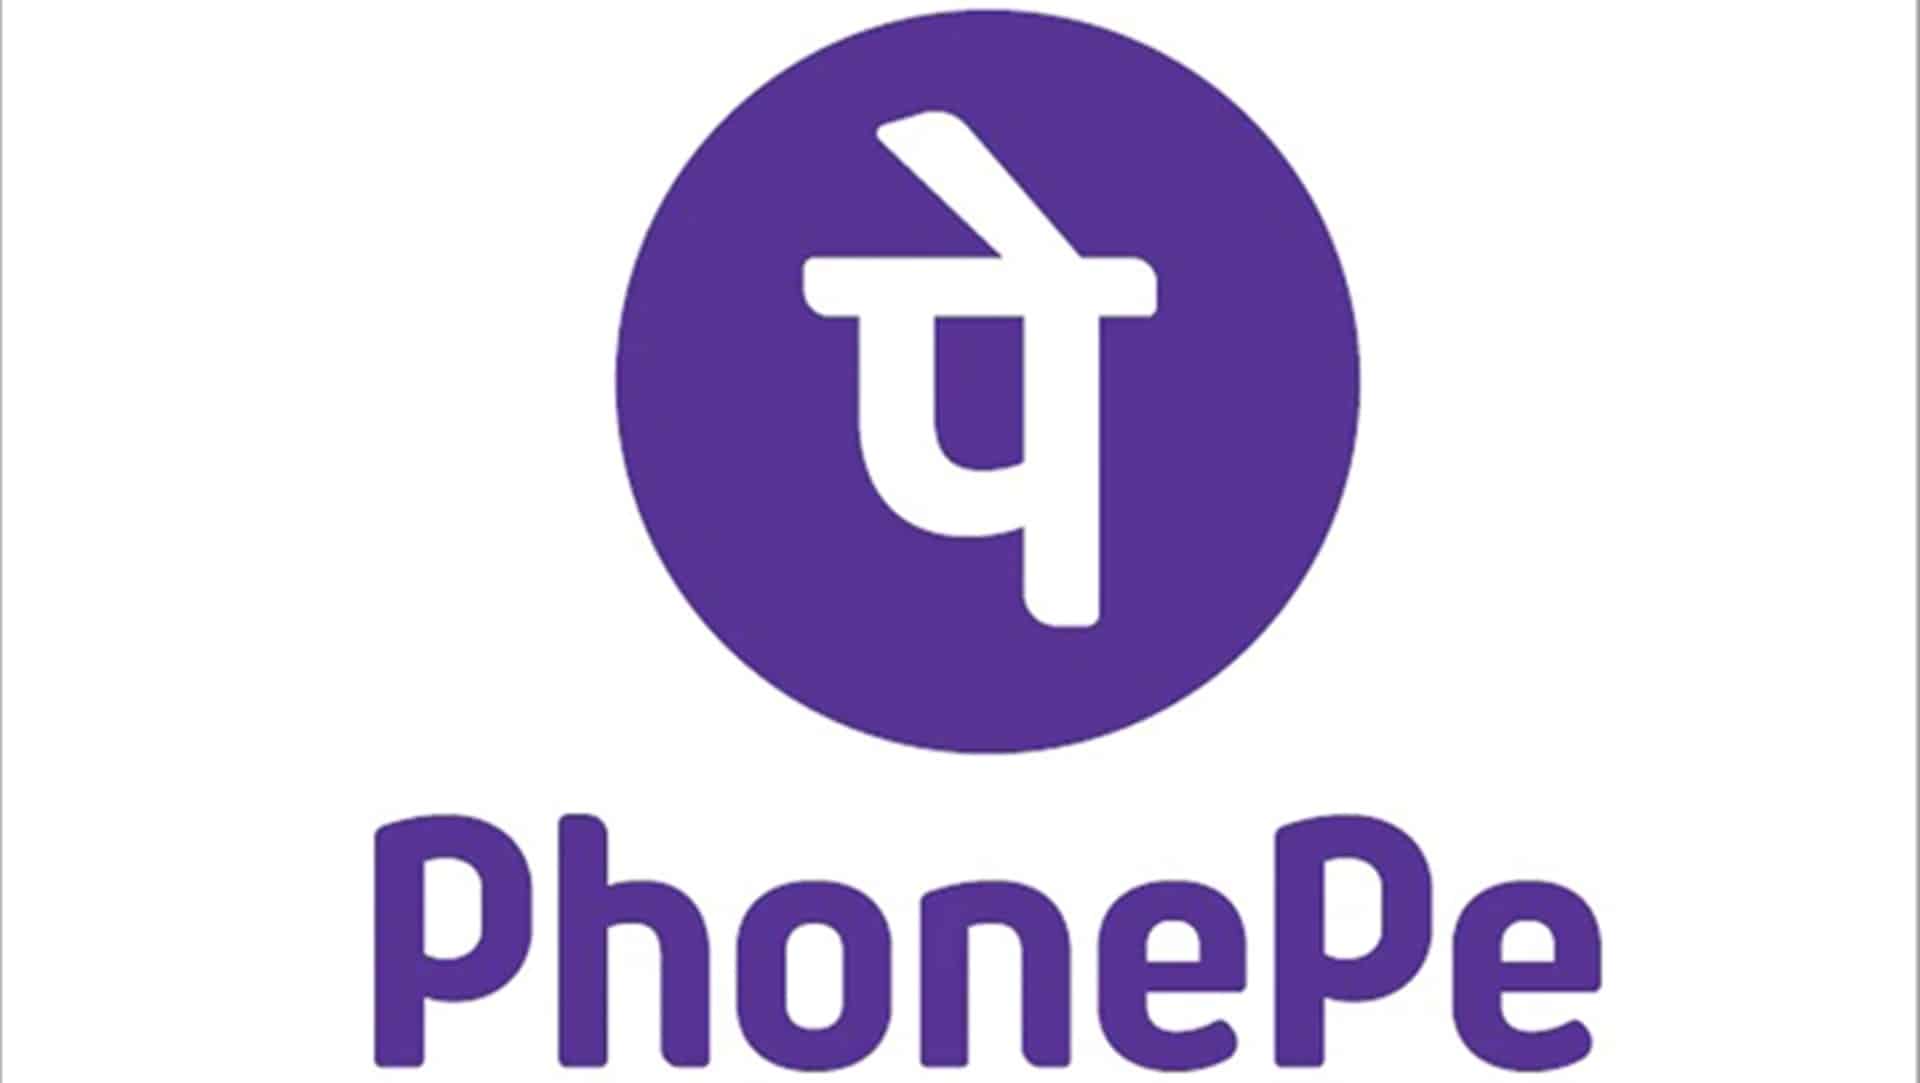 PhonePe starts charging fee on UPI transactions for mobile recharges